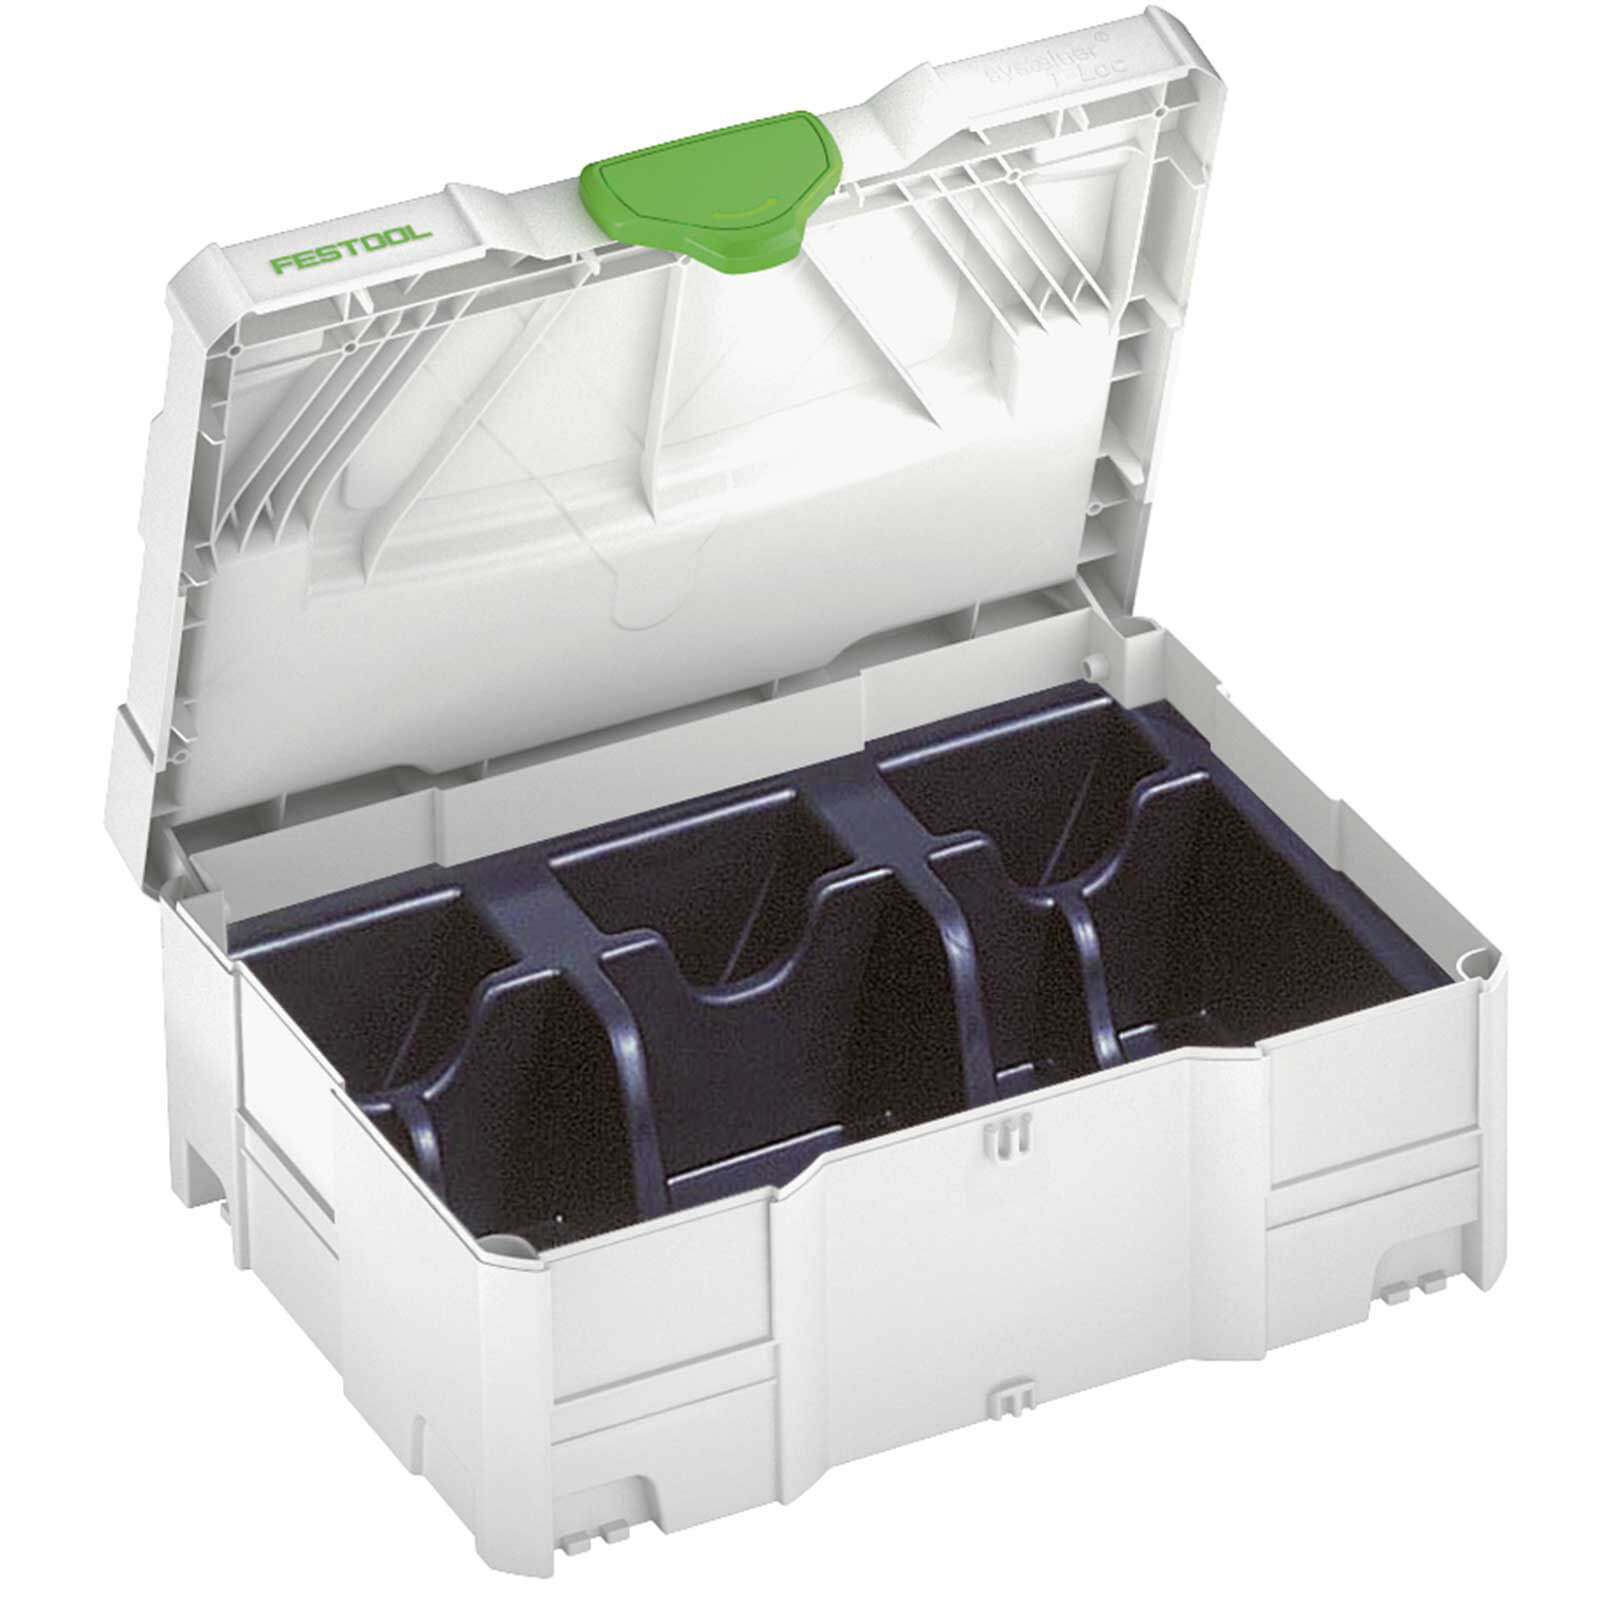 Photos - Tool Box Festool SYS-STF D125 Systainer Case for Abrasives 497685 